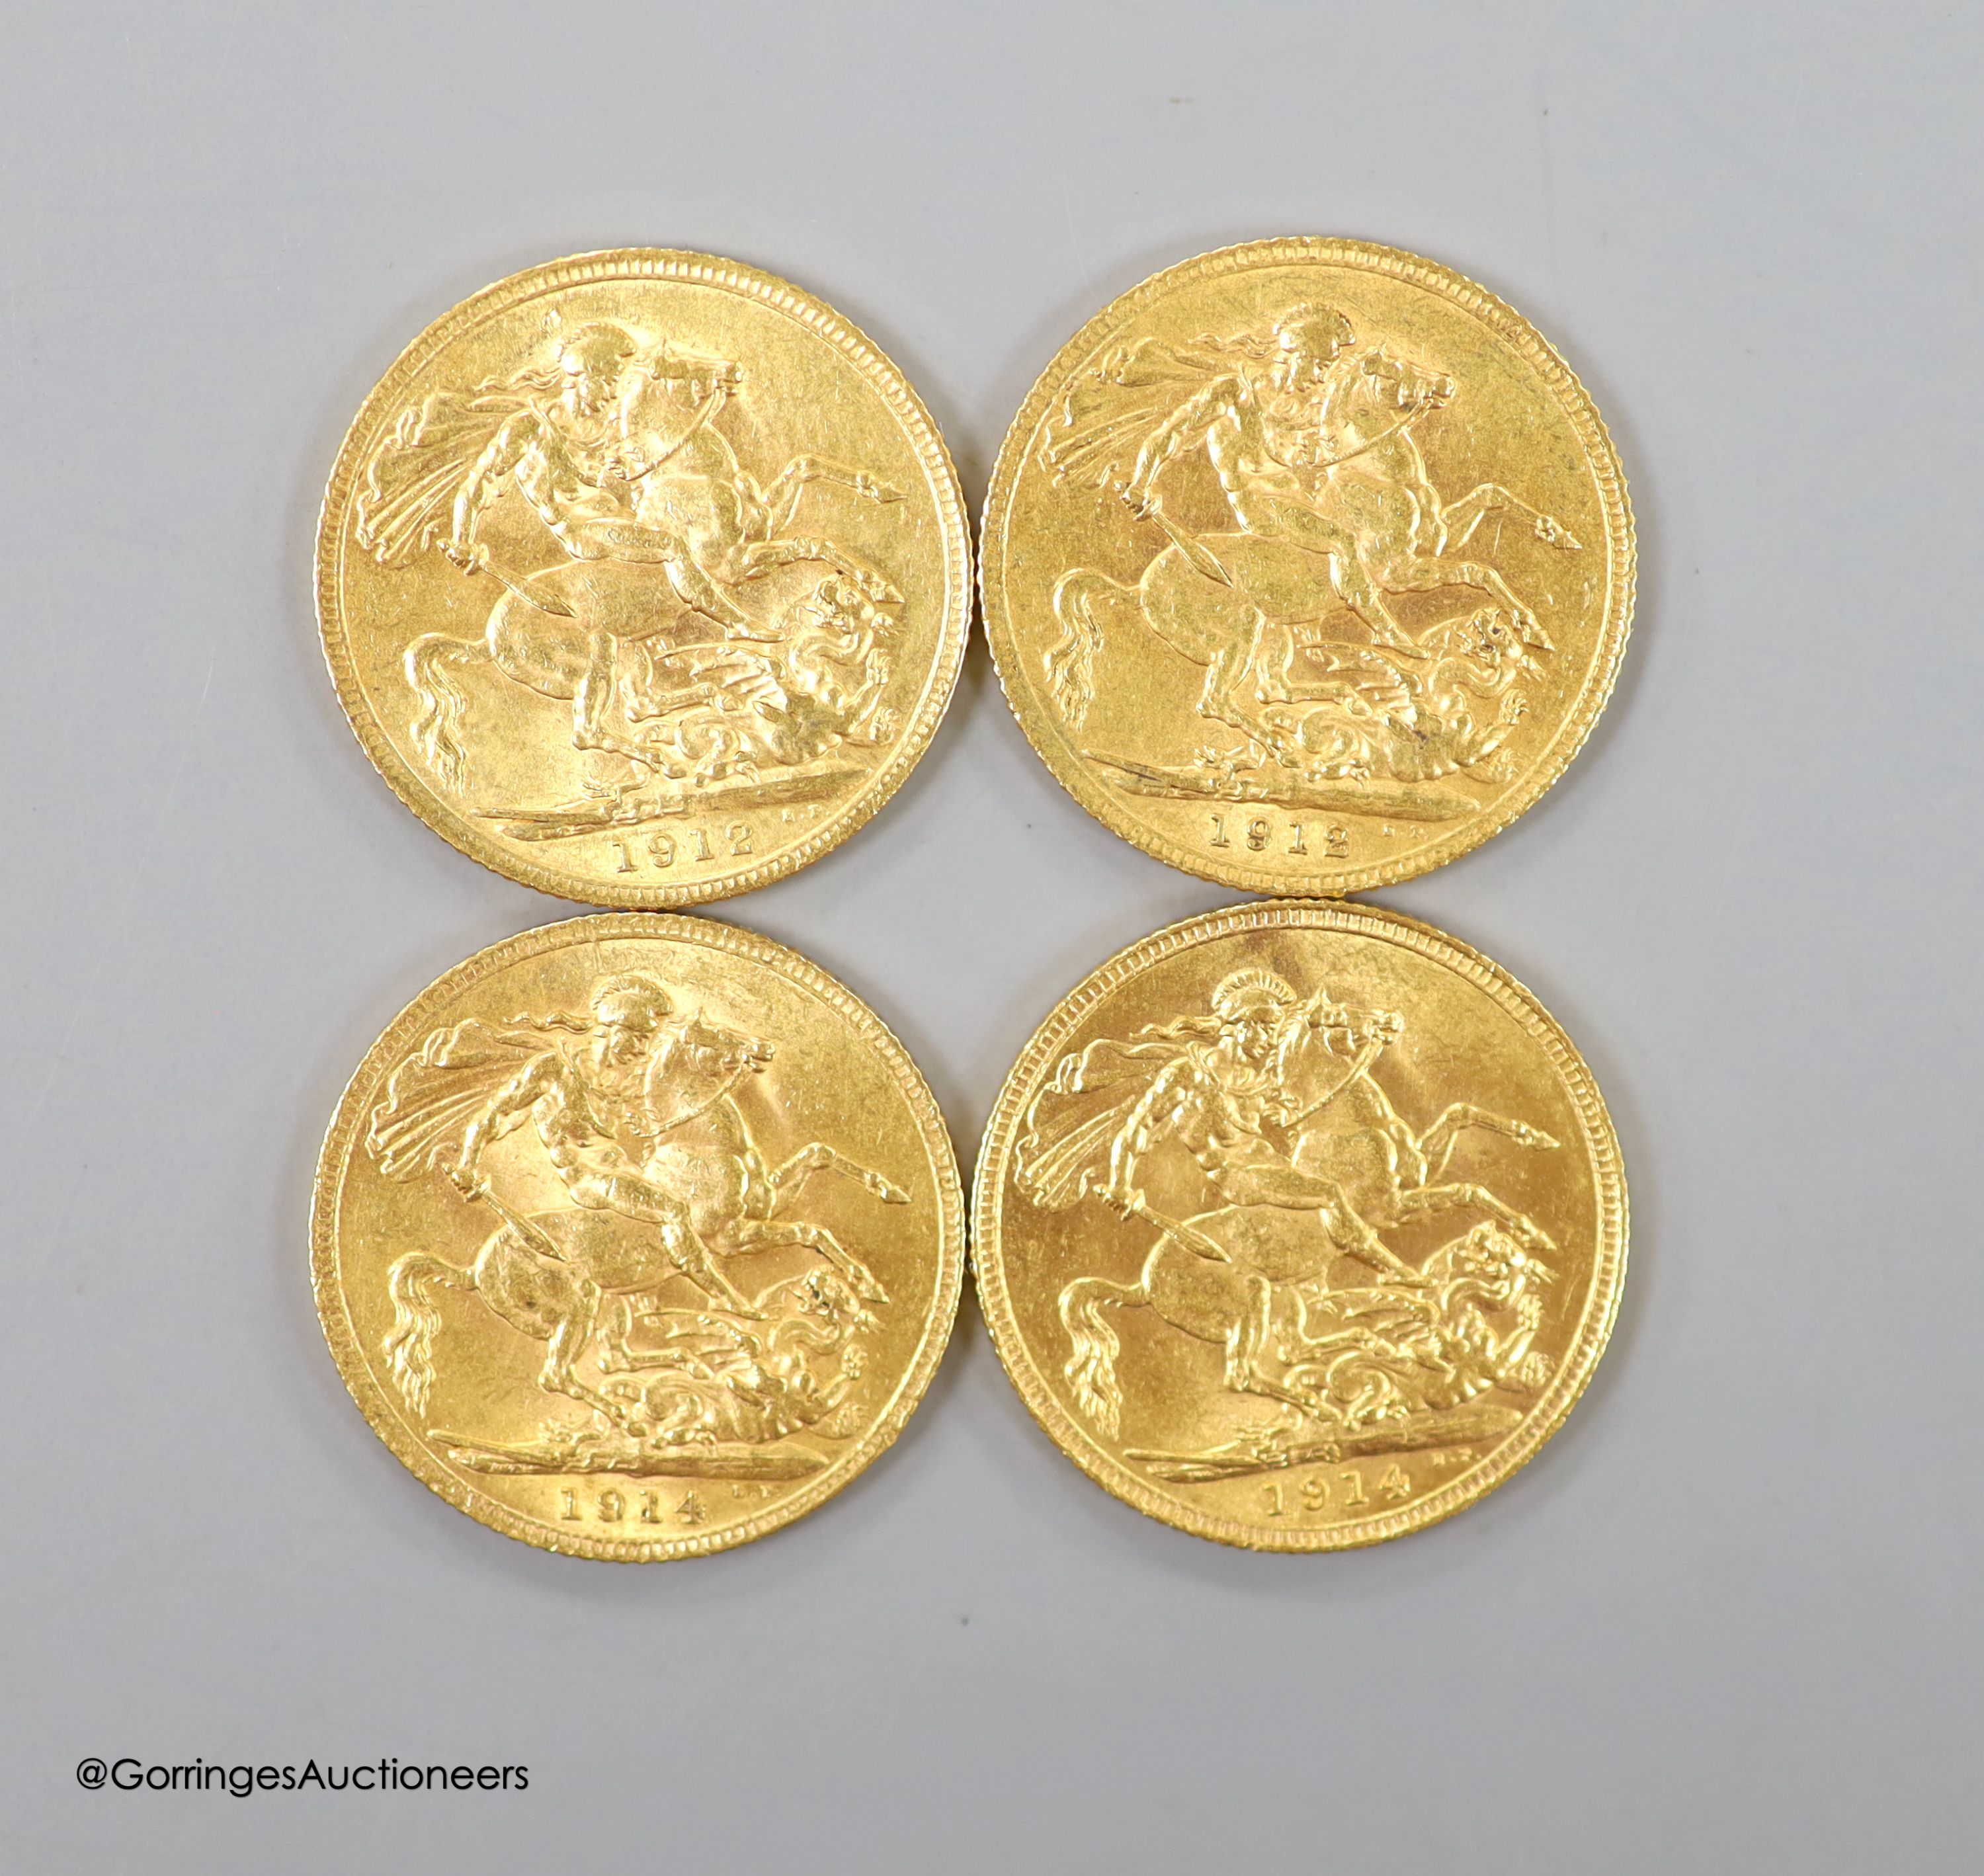 Four George V gold sovereigns, two 1912 and two 1914 (one Sydney mint)